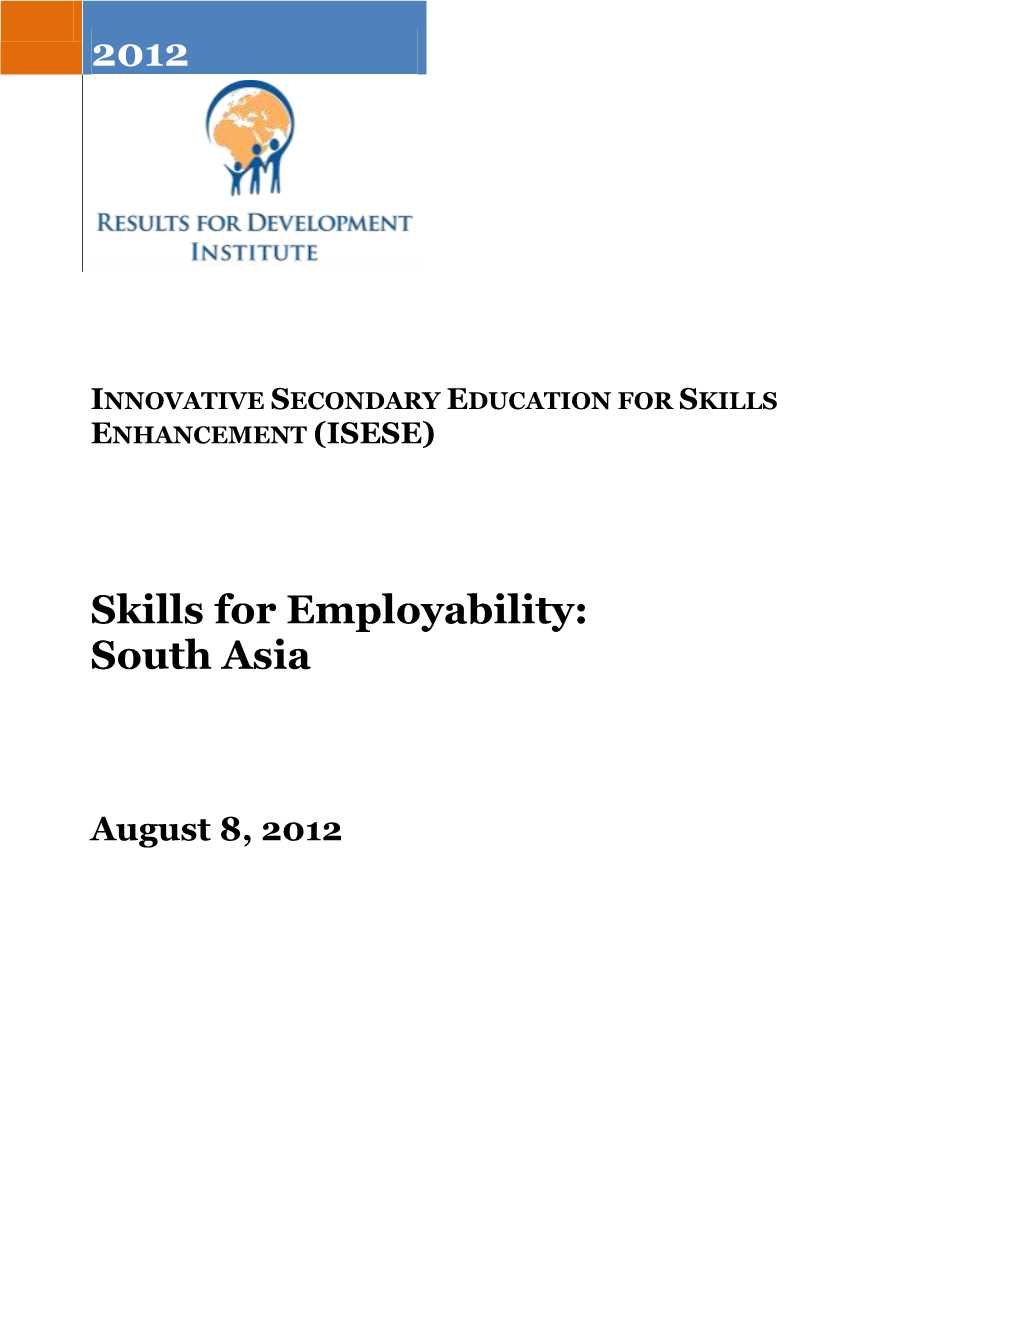 Research Study on Skills for Employability in South Asia